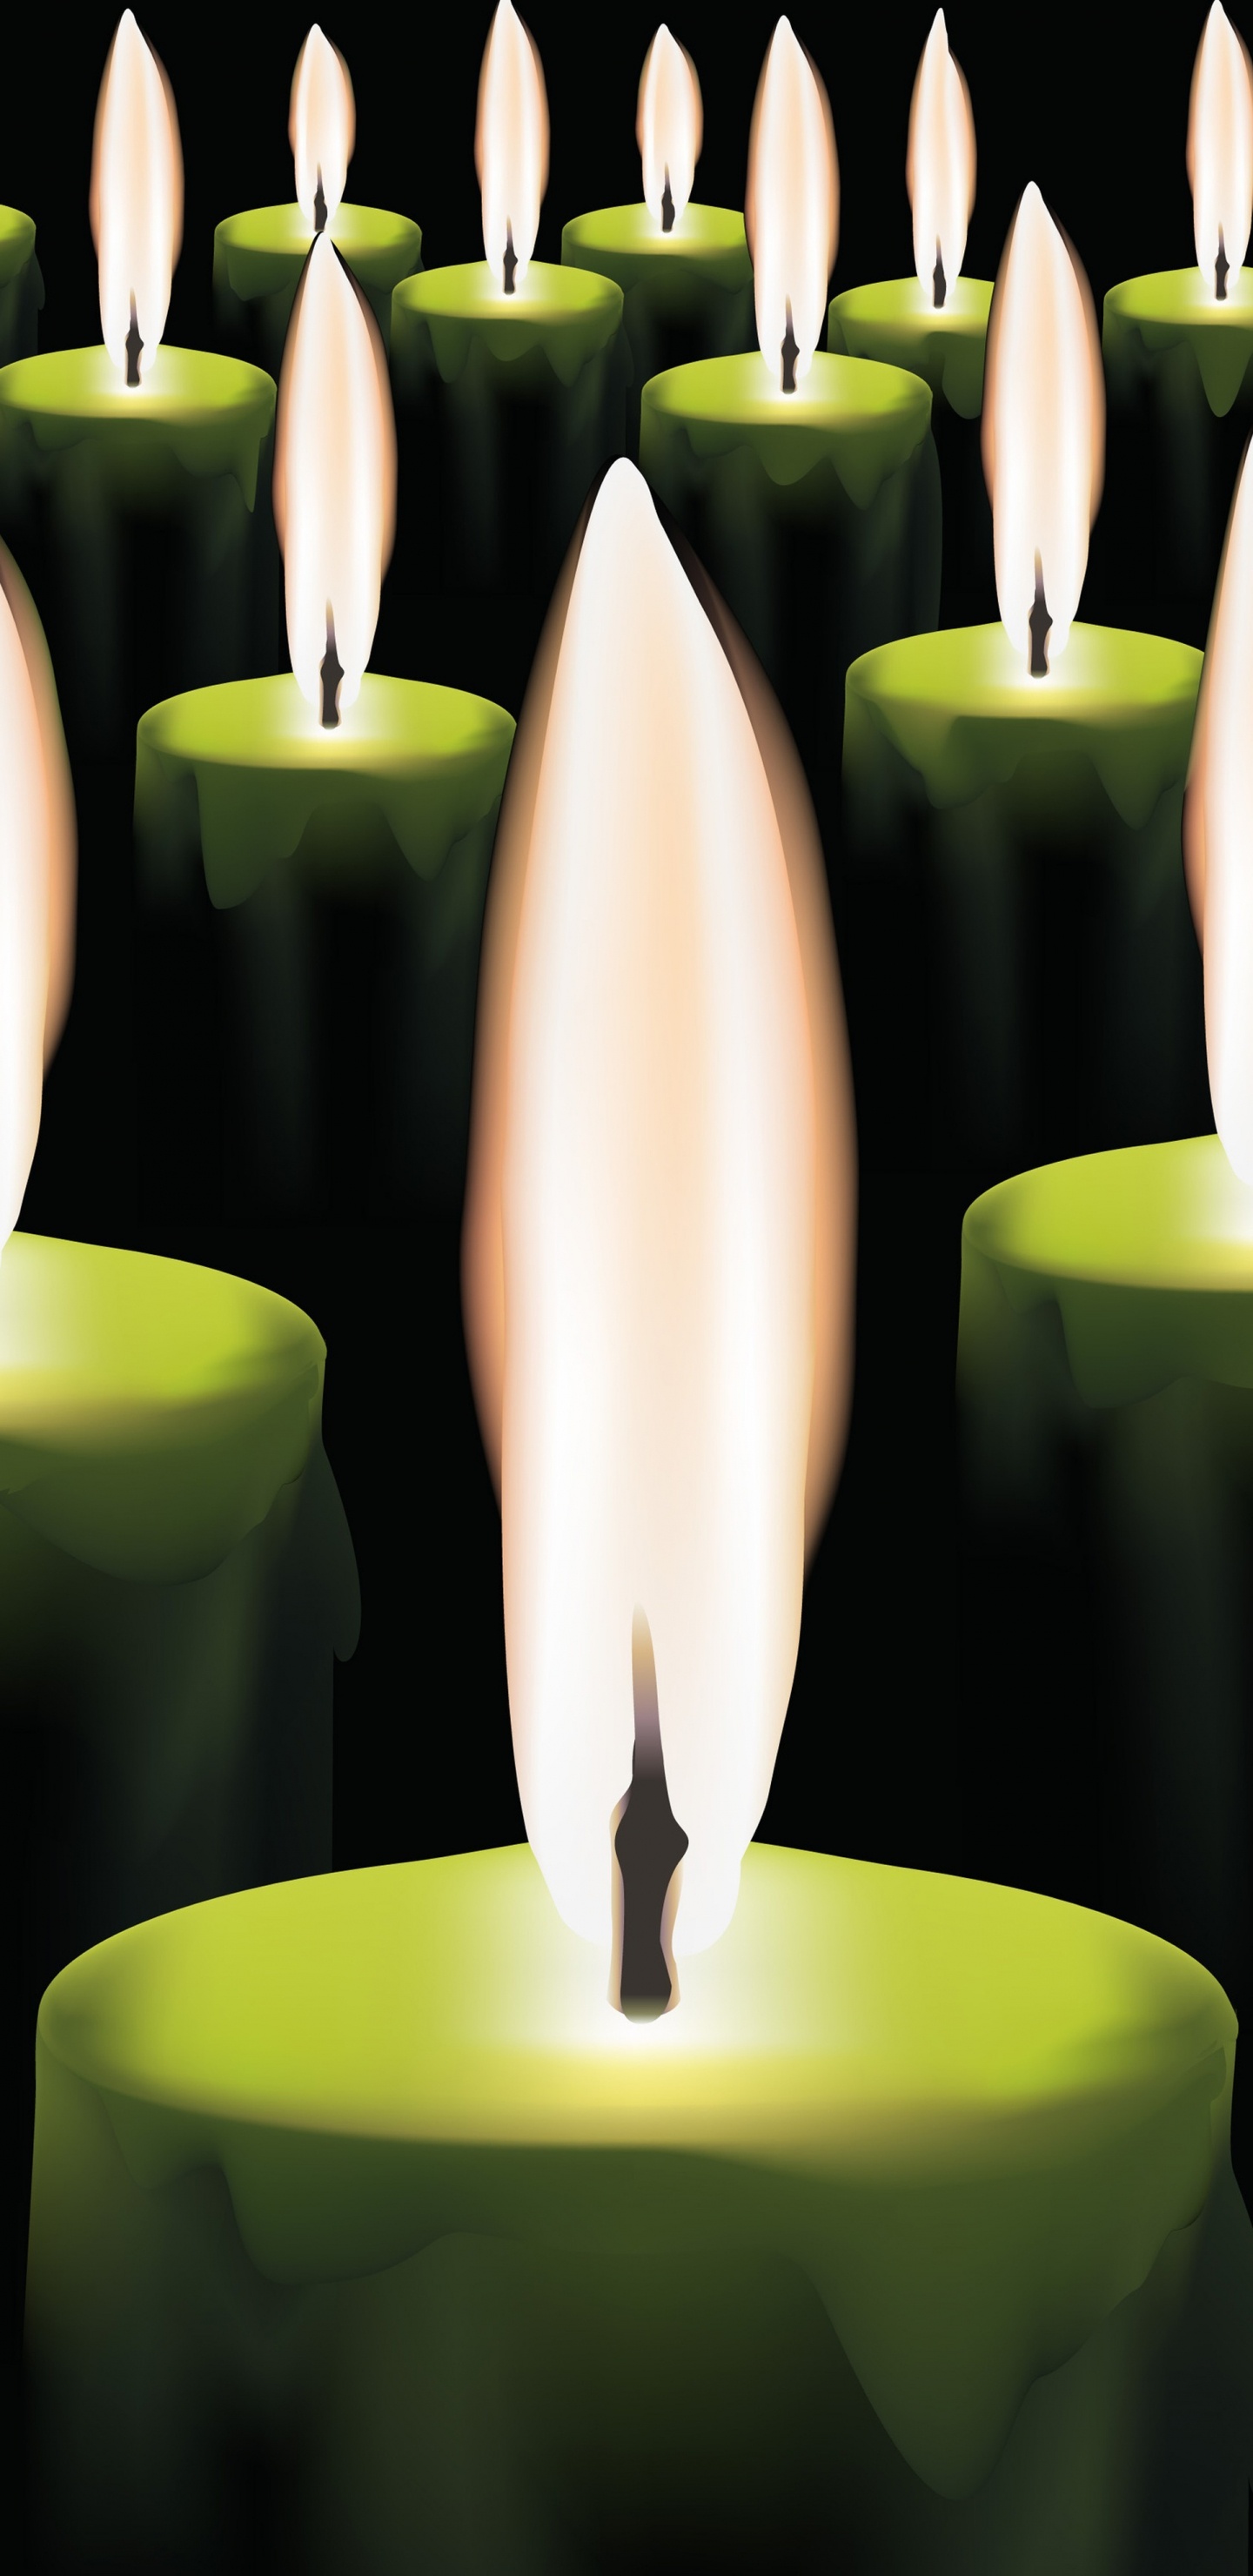 Burning Candles, Candle, Flame, Light, Lighting. Wallpaper in 1440x2960 Resolution